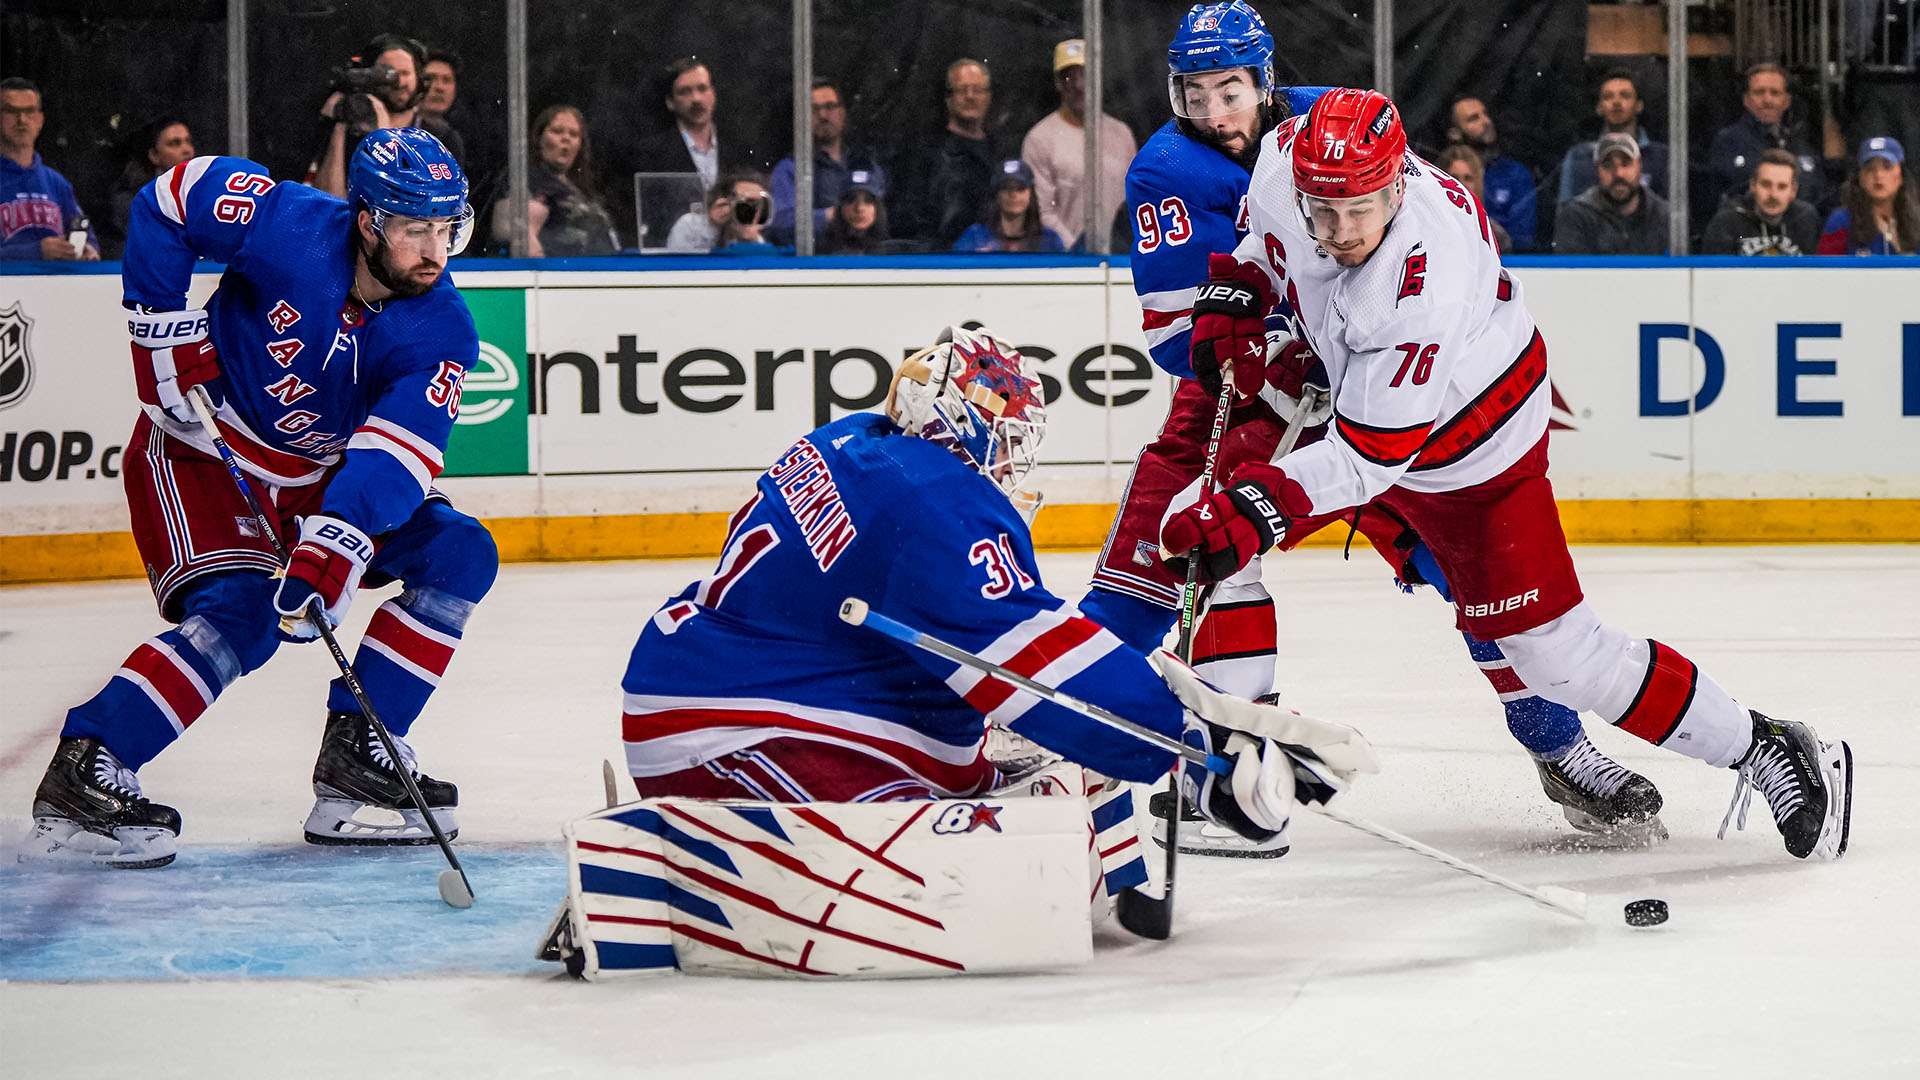 ESPN suffers major technical glitch during NHL game as broadcaster cuts away from Rangers with a minute left of play [Video]